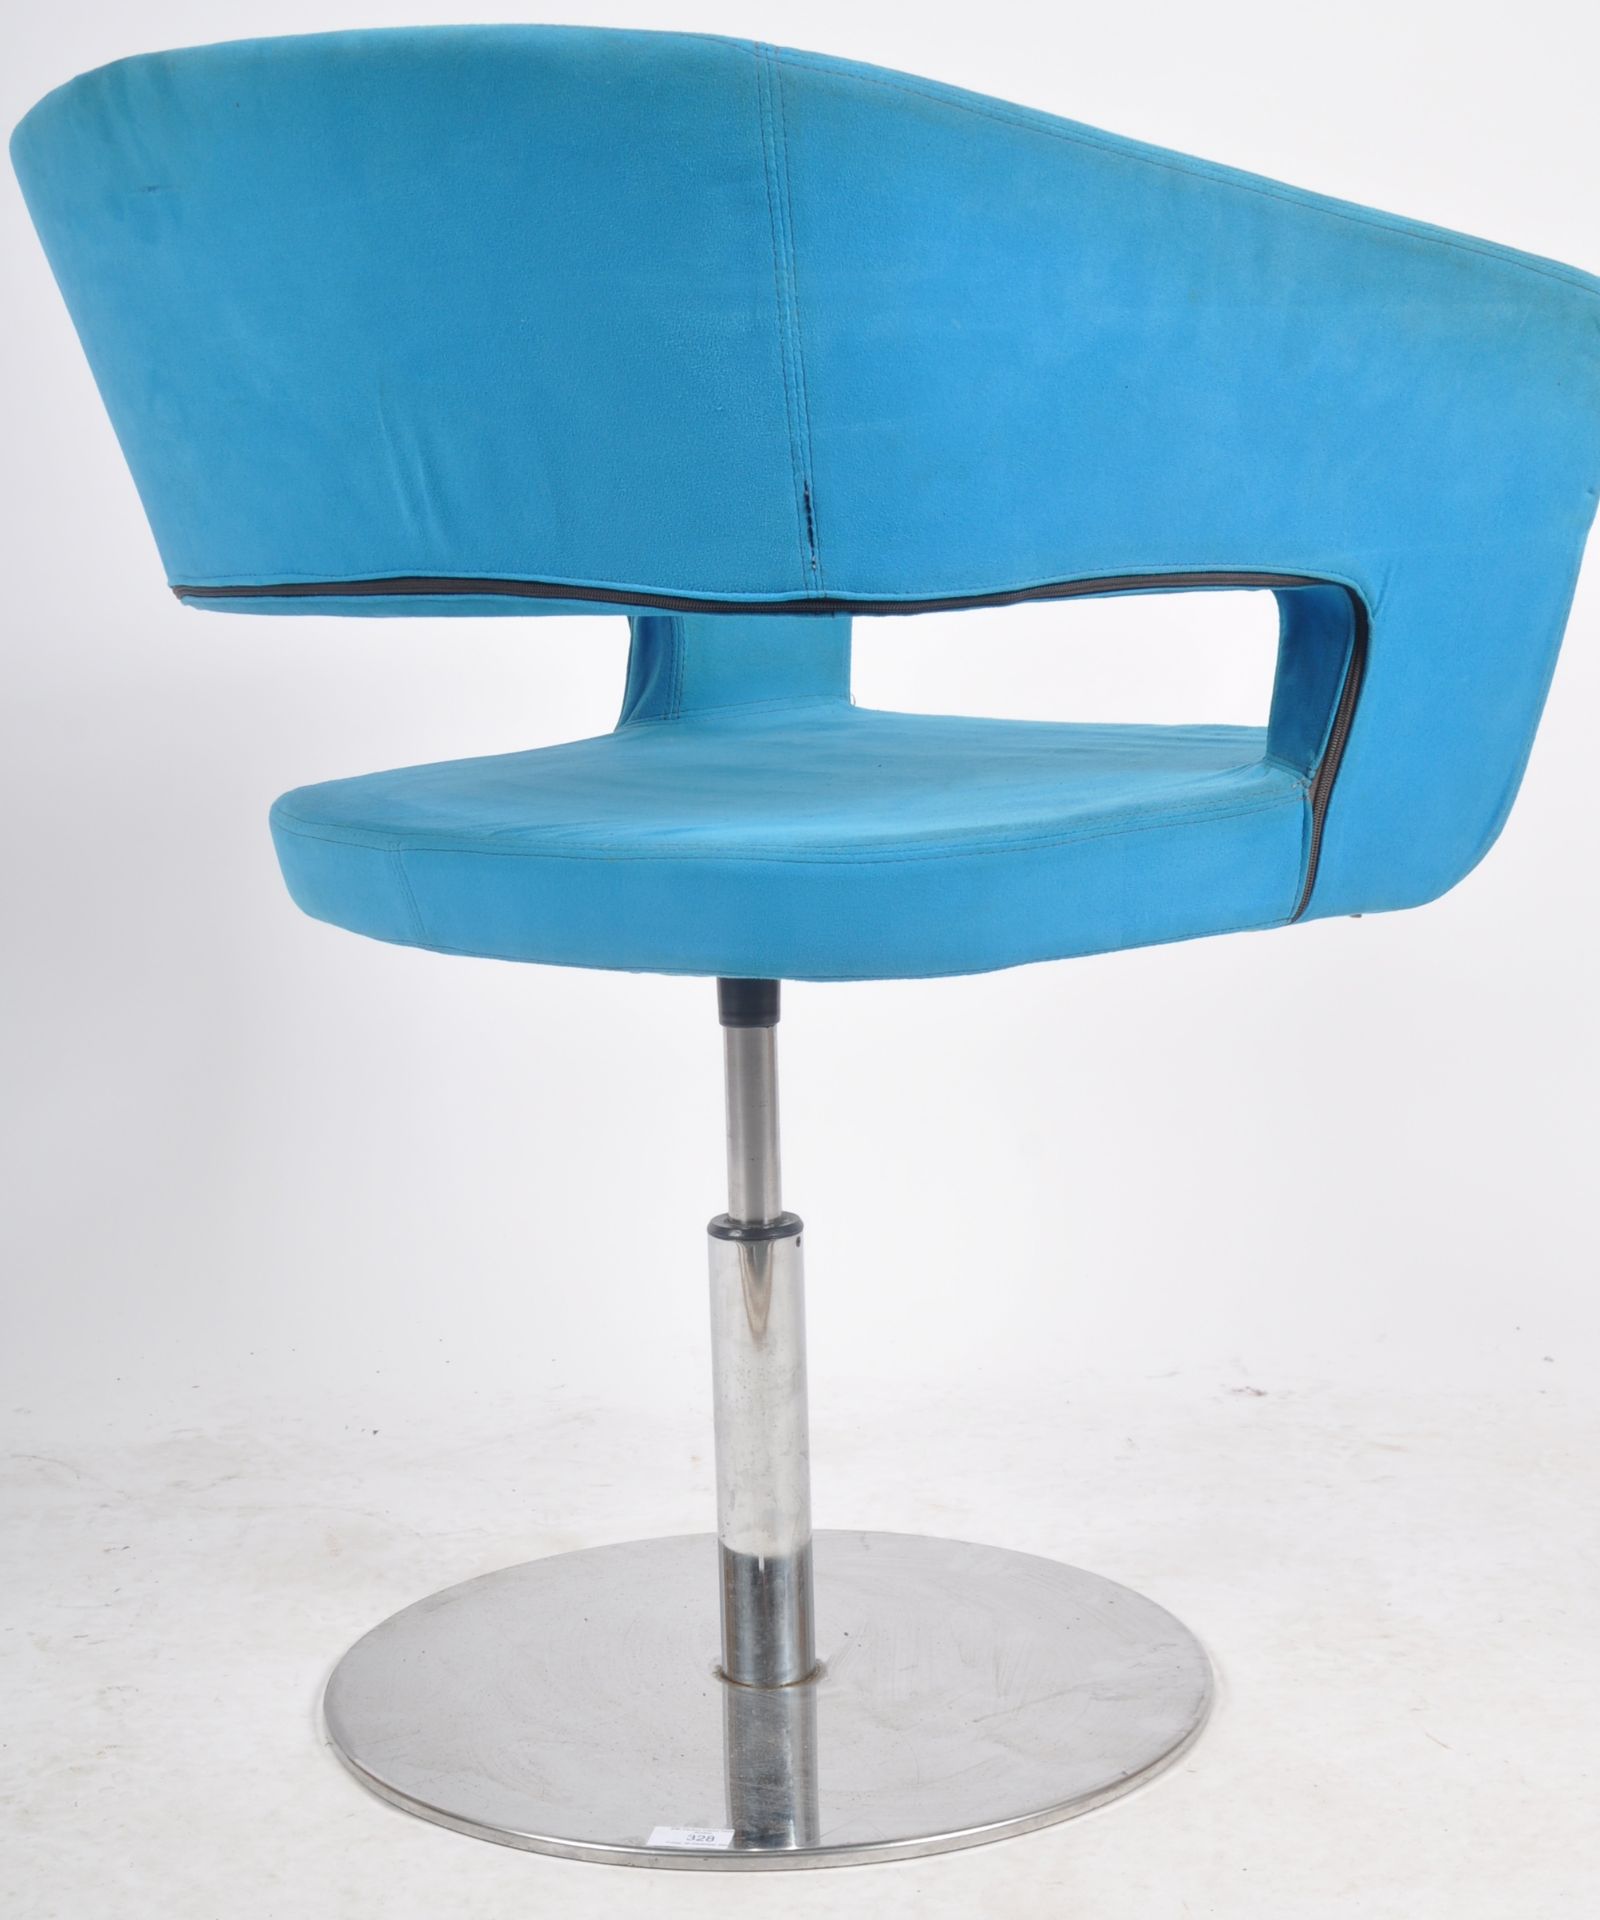 CONTEMPORARY DESIGNER SWIVEL OFFICE / LOBBY CHAIR - Image 7 of 7